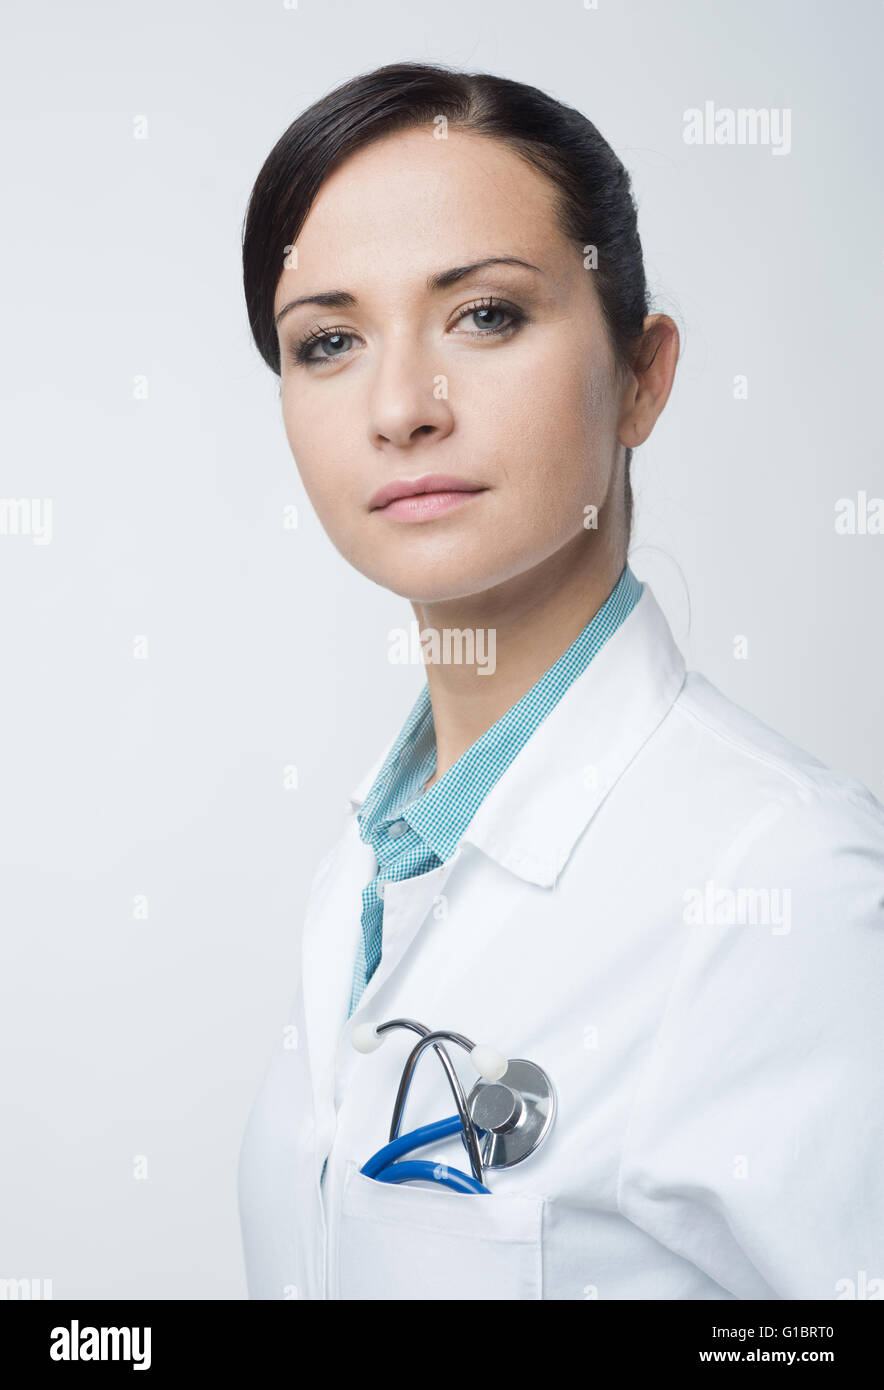 Smiling Confident Female Doctor Portrait With Lab Coat And Stethoscope